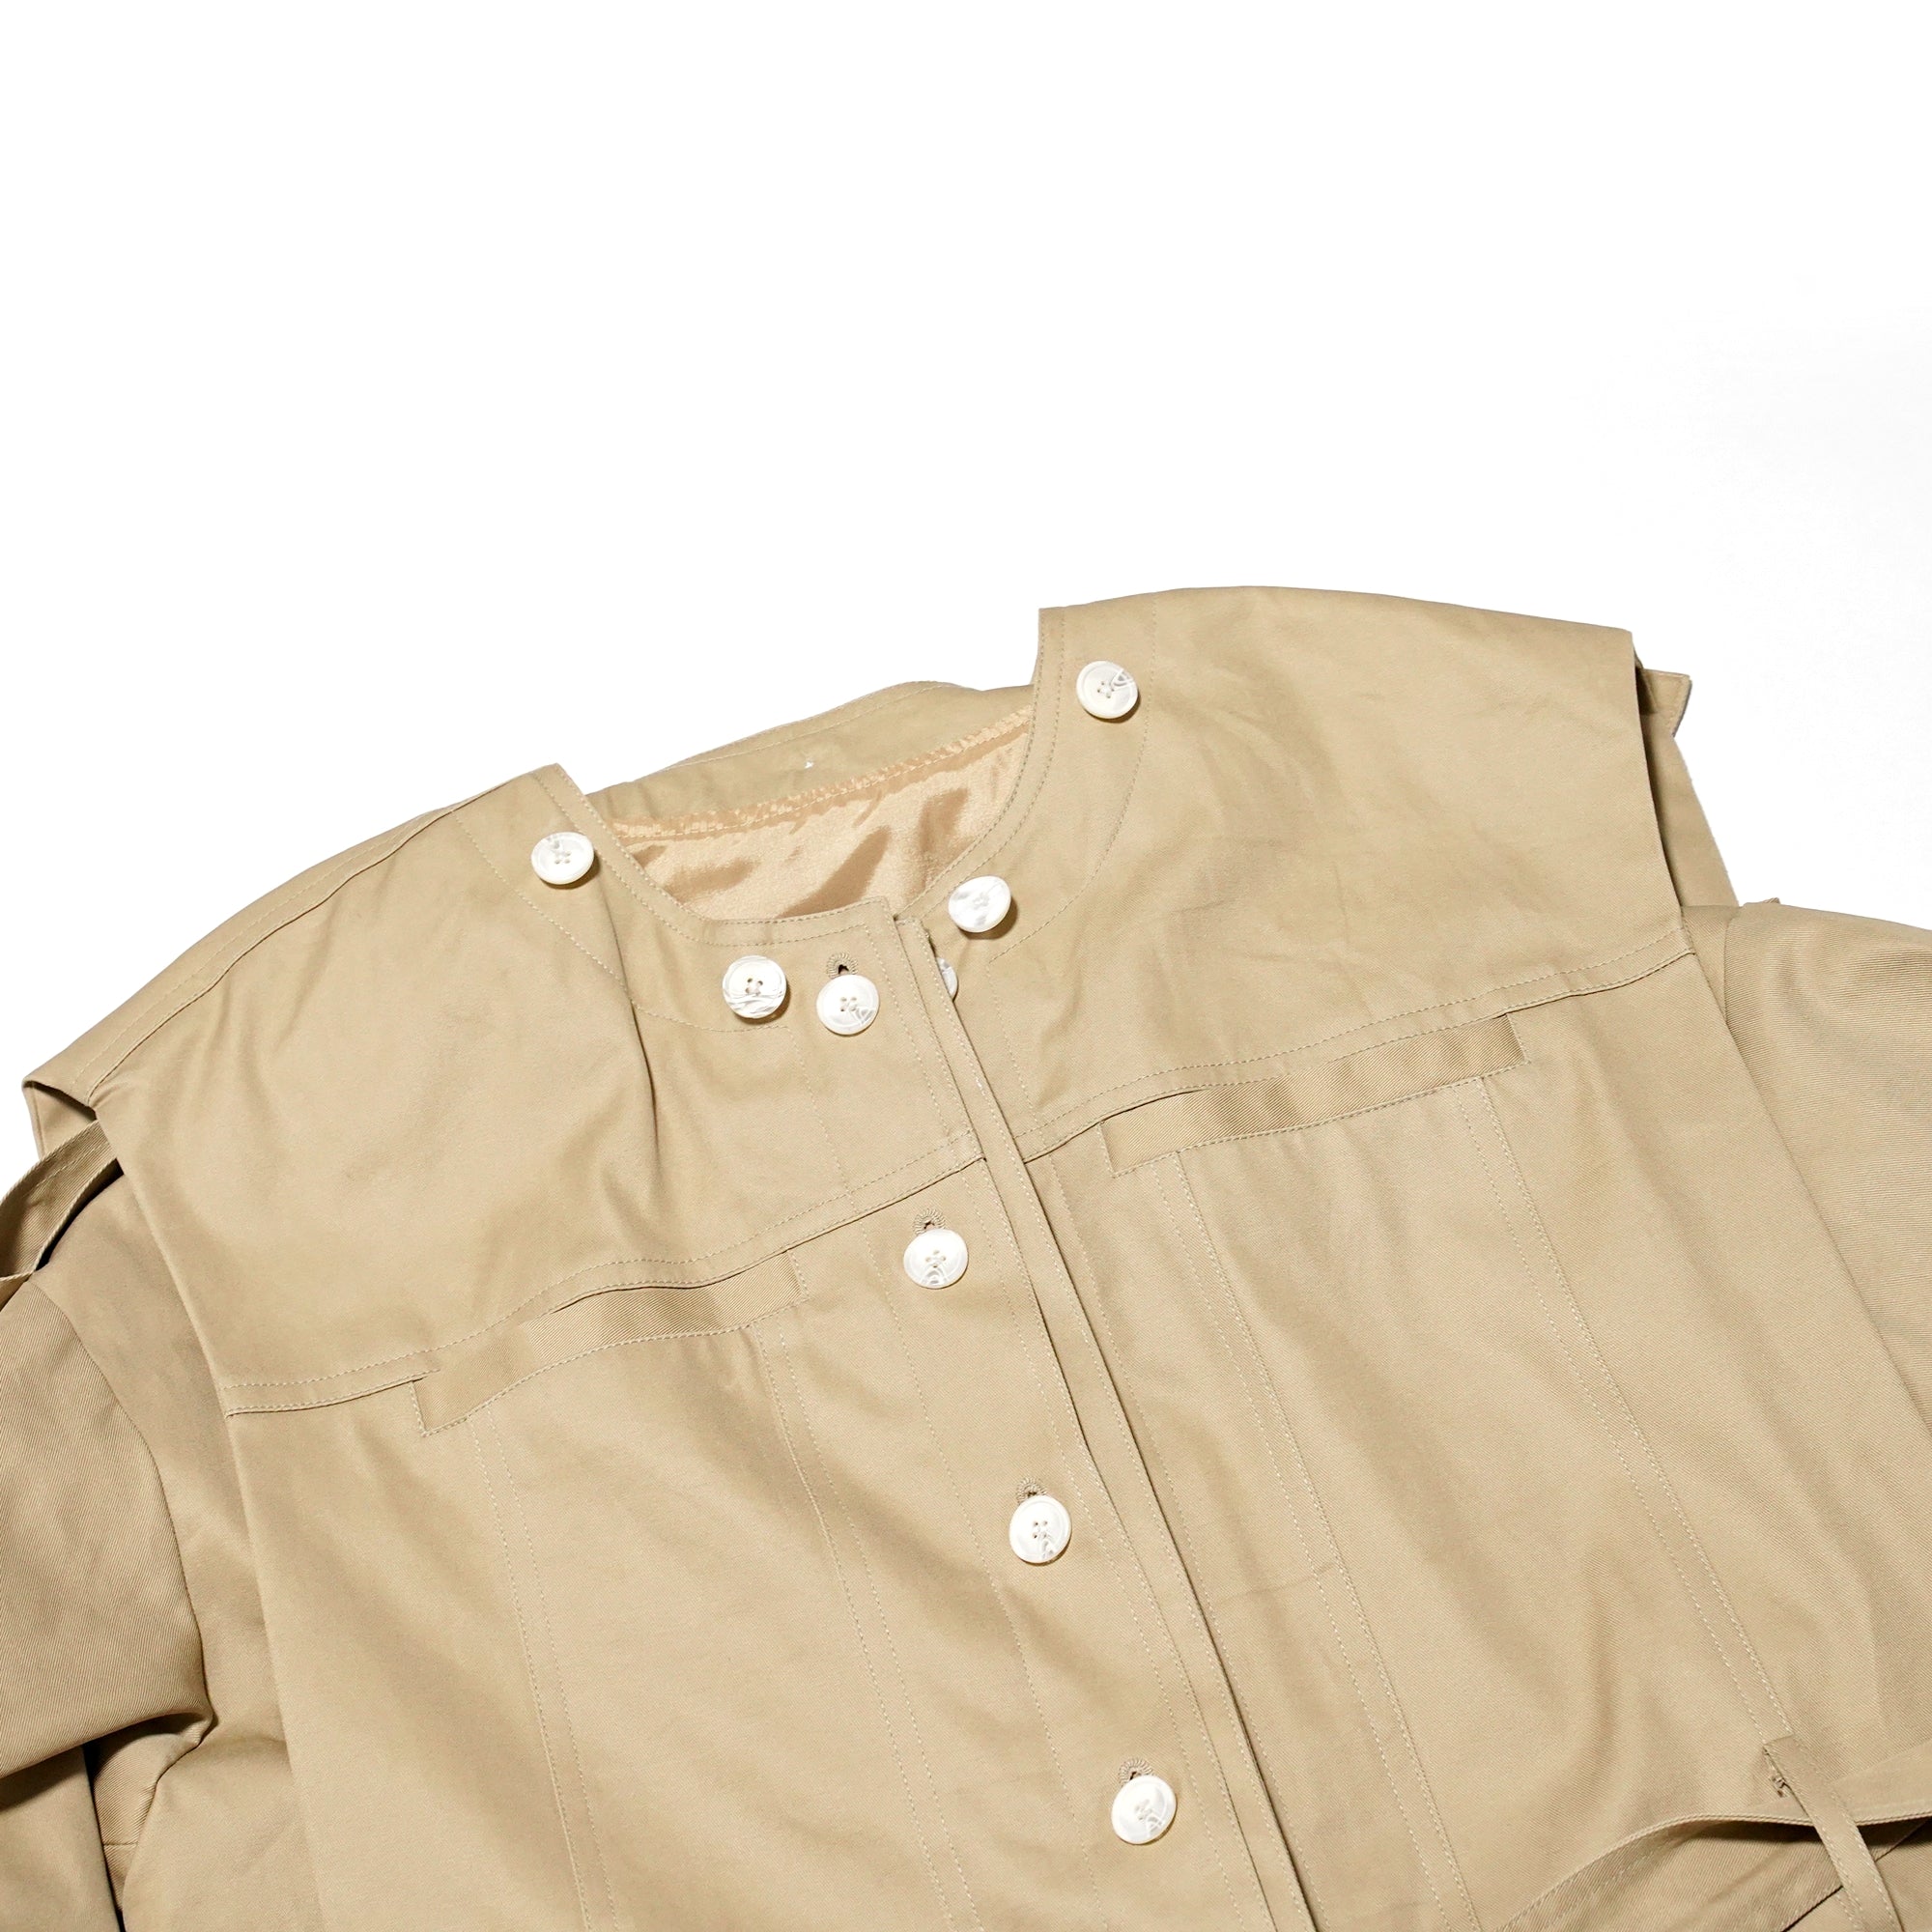 No:OSK-FW21-25A | Name:Beauty Of The Night | Color:Camel | Size:XS/S【OSKER THE LABEL】-OSKER THE LABEL-ADDICTION FUKUOKA